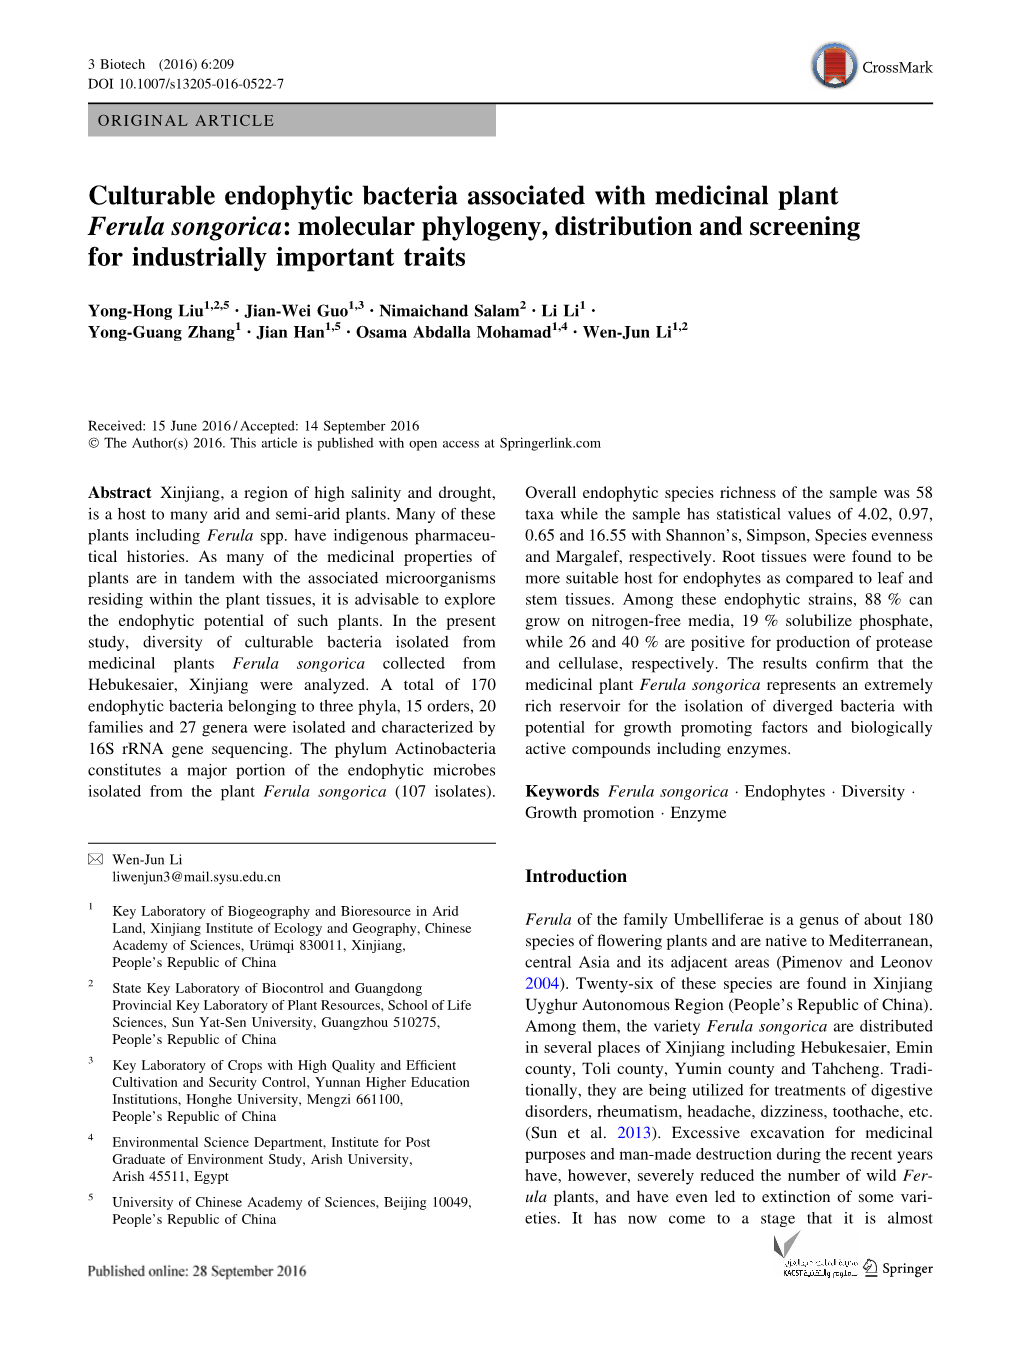 Culturable Endophytic Bacteria Associated with Medicinal Plant Ferula Songorica: Molecular Phylogeny, Distribution and Screening for Industrially Important Traits